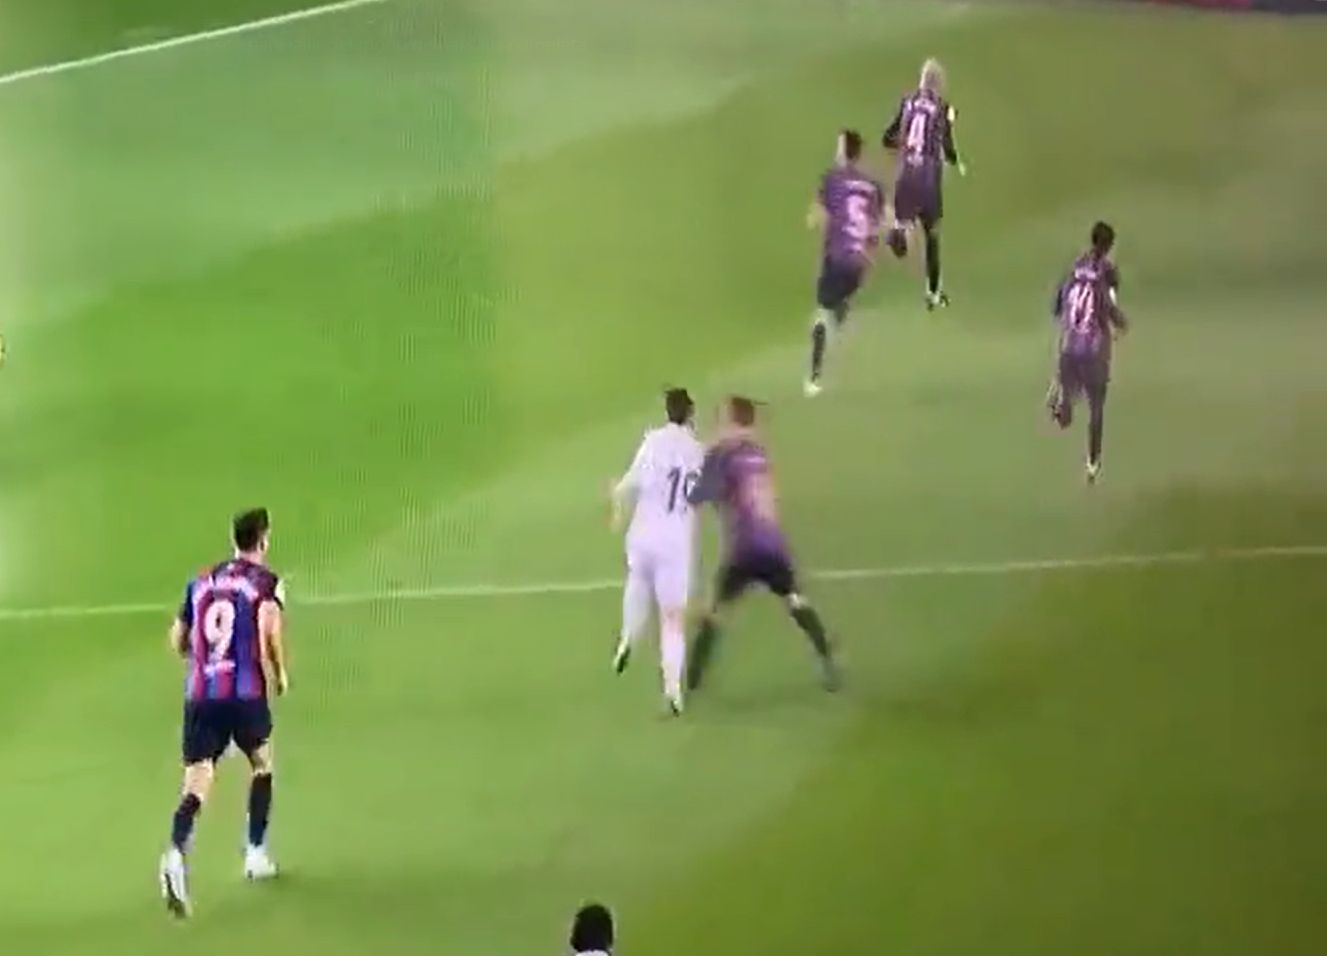 WATCH: Gavi caught taking out Dani Ceballos off the ball during El Clasico